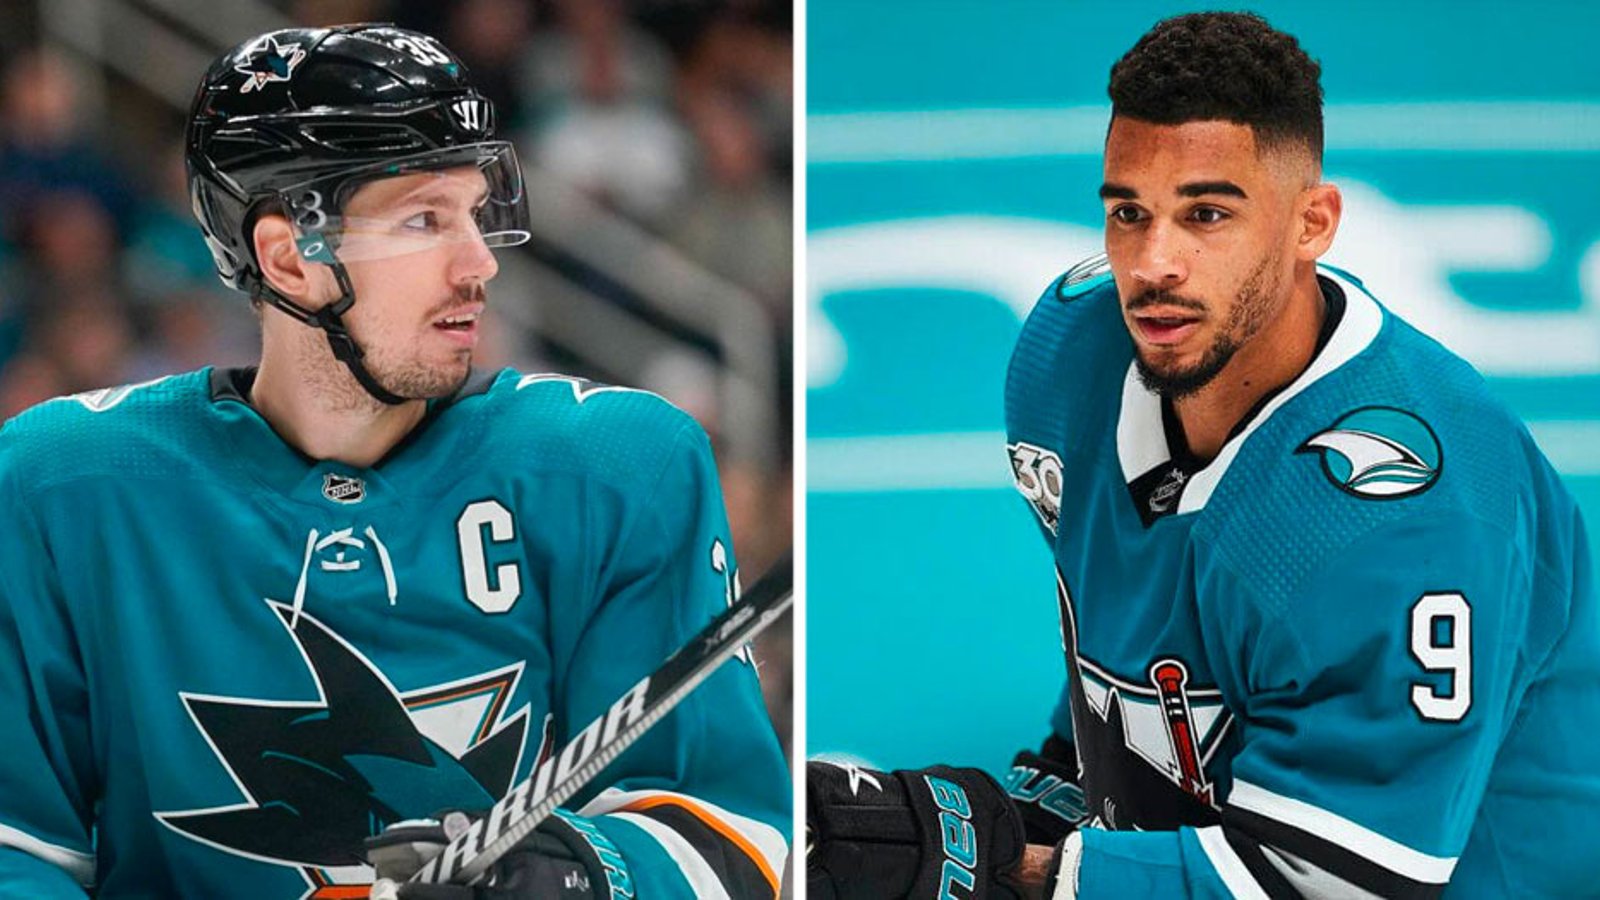 Logan Couture appears to throw Evander Kane under the bus, makes comments on “locker room issues”